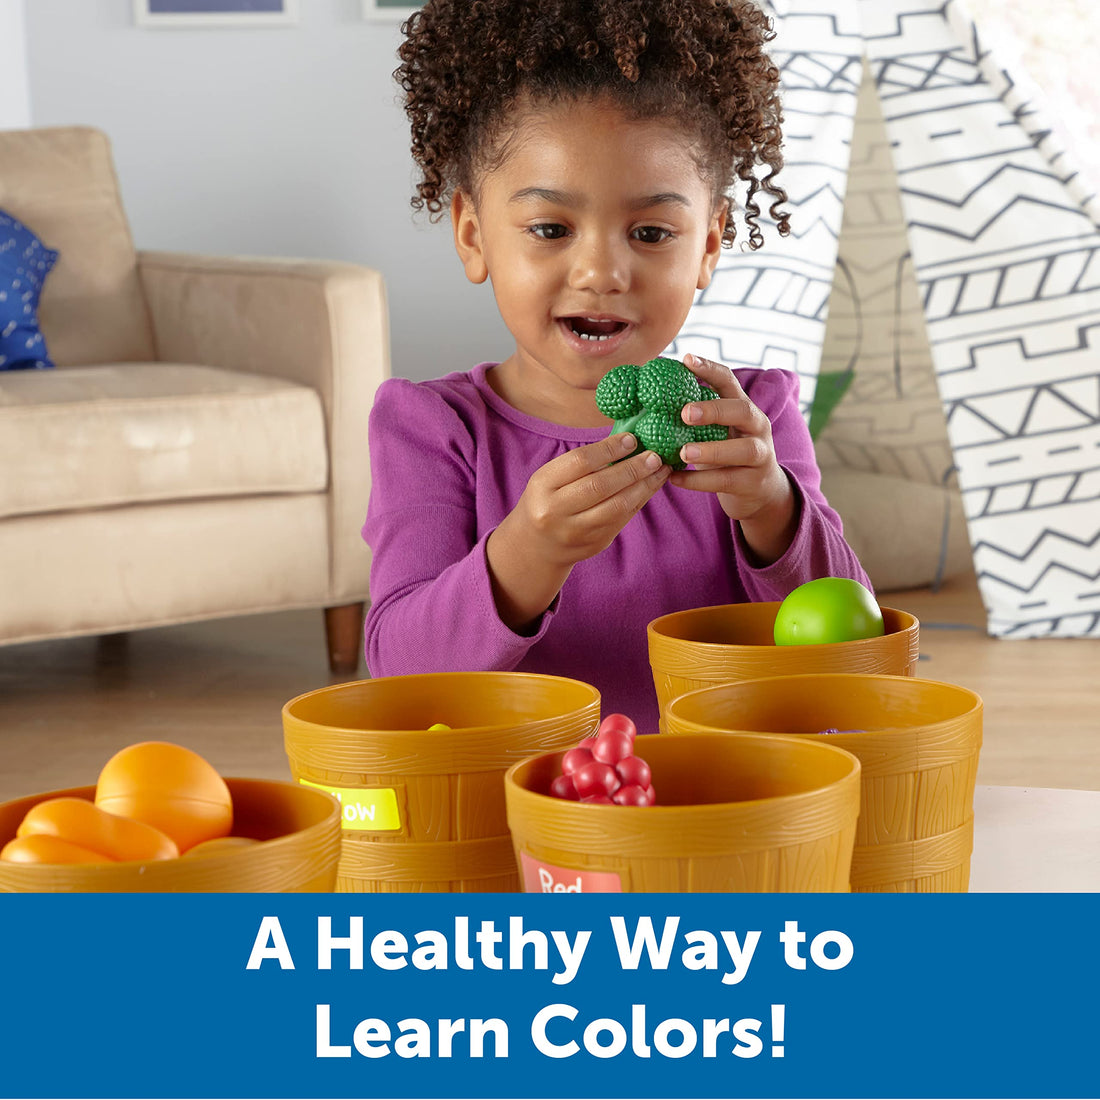 Interactive Playtime: Fostering Social Skills with the Farmer’s Market Color Sorting Set"